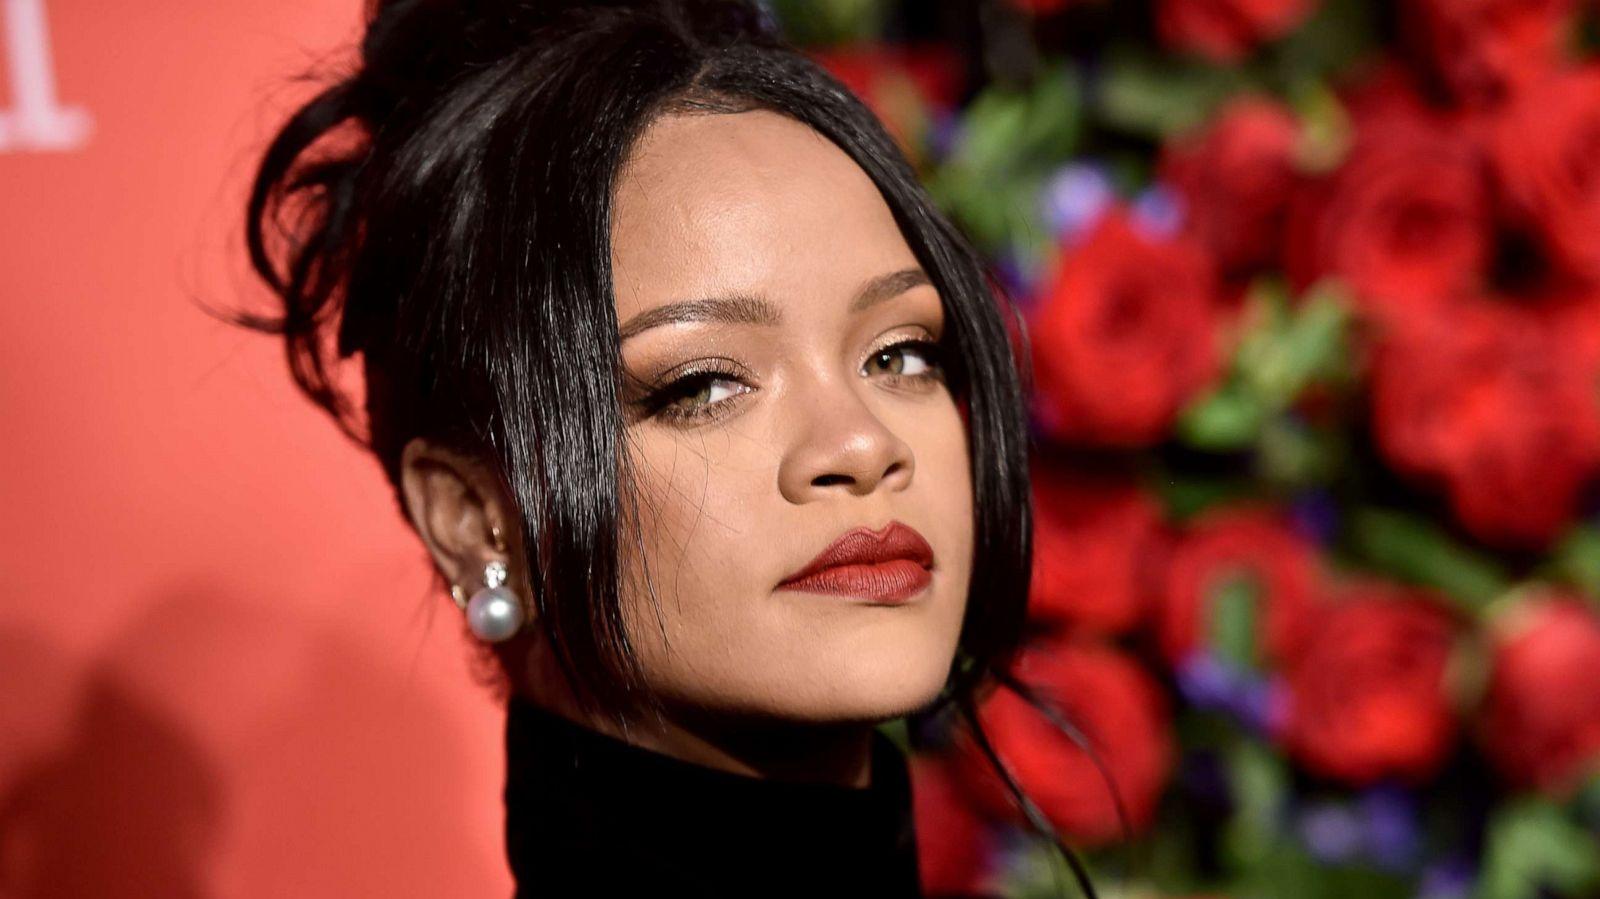 Yes Rihanna turned down Super Bowl halftime show in solidarity